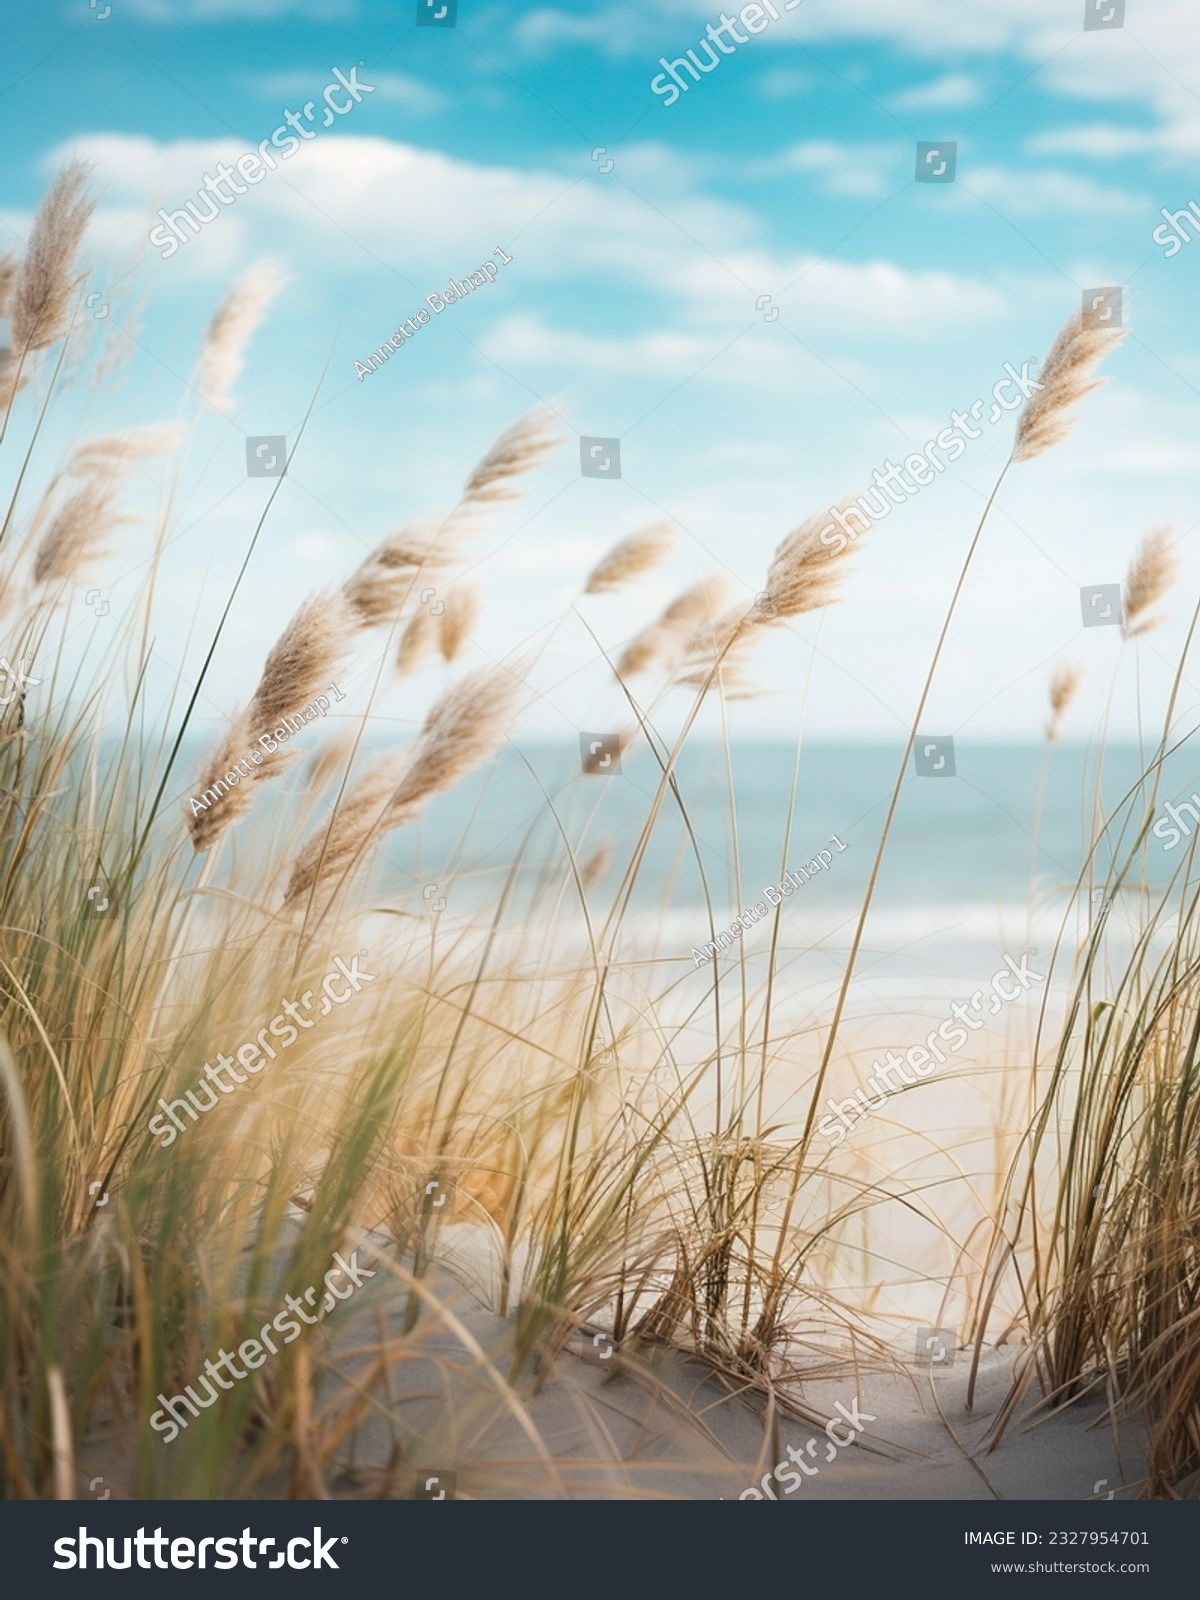 Beach Grass Looking towards a sandy beach with bright blue sky and white clouds taken from a low perspective. Peeking through beach grass towards the ocean. #2327954701